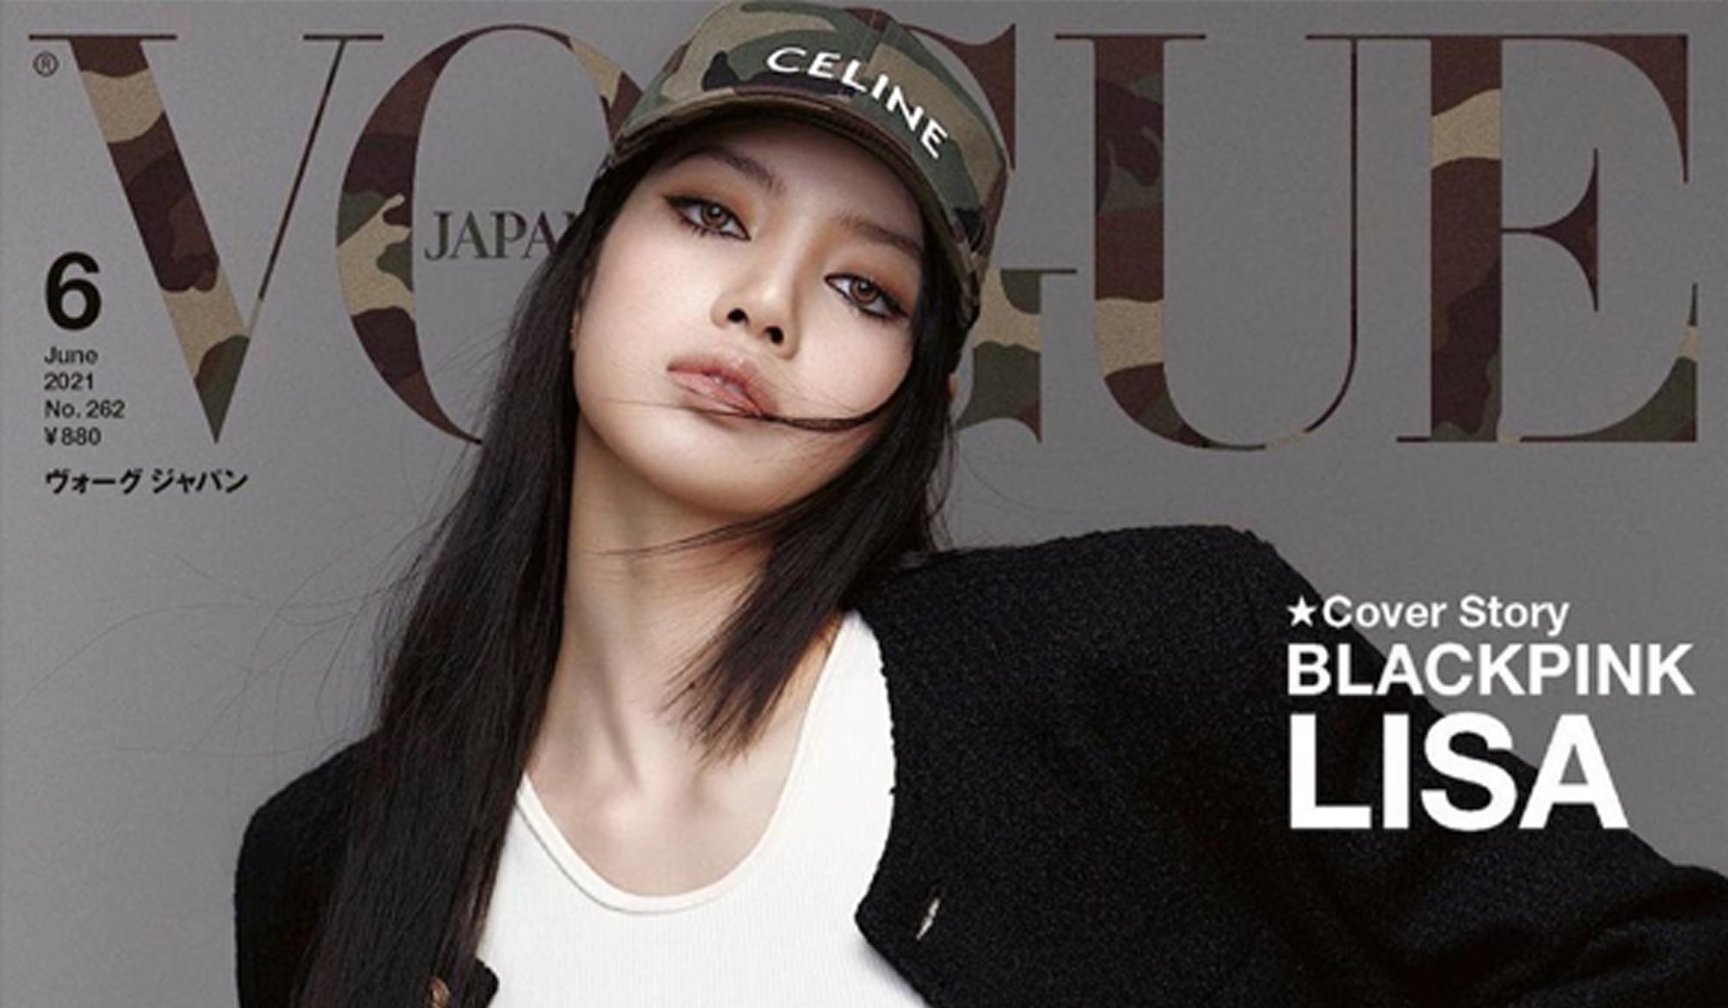 BLACKPINK's Lisa featured on the cover of Vogue Japan | allkpop